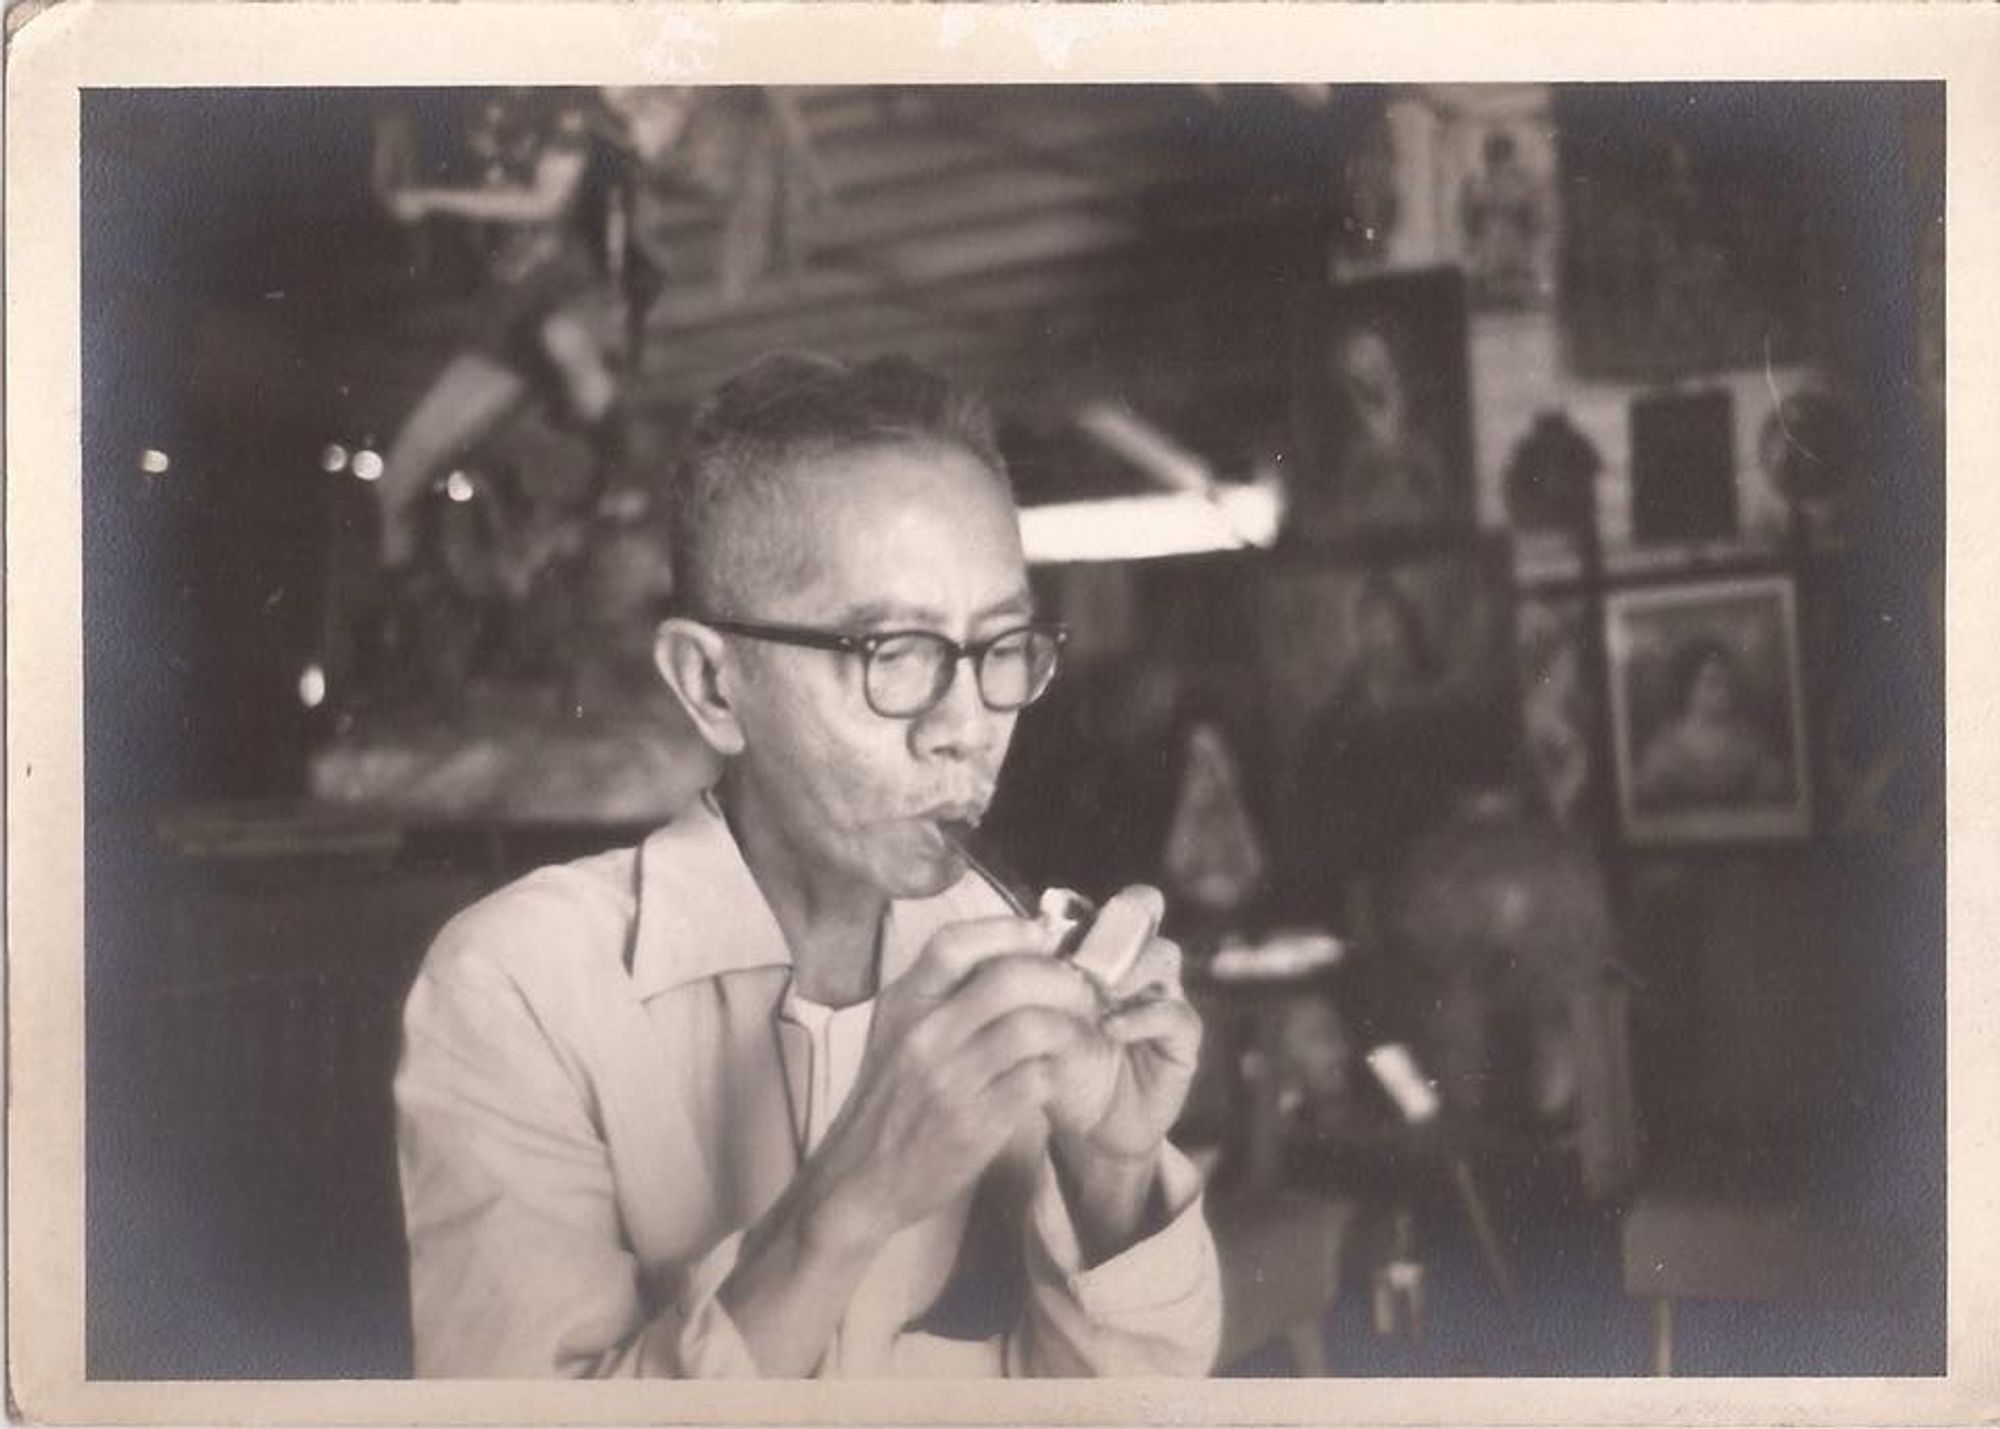 A photograph of Protomartir in old age. He is wearing black-rimmed glasses and a collared jacket. He is in the middle of lighting a pipe.